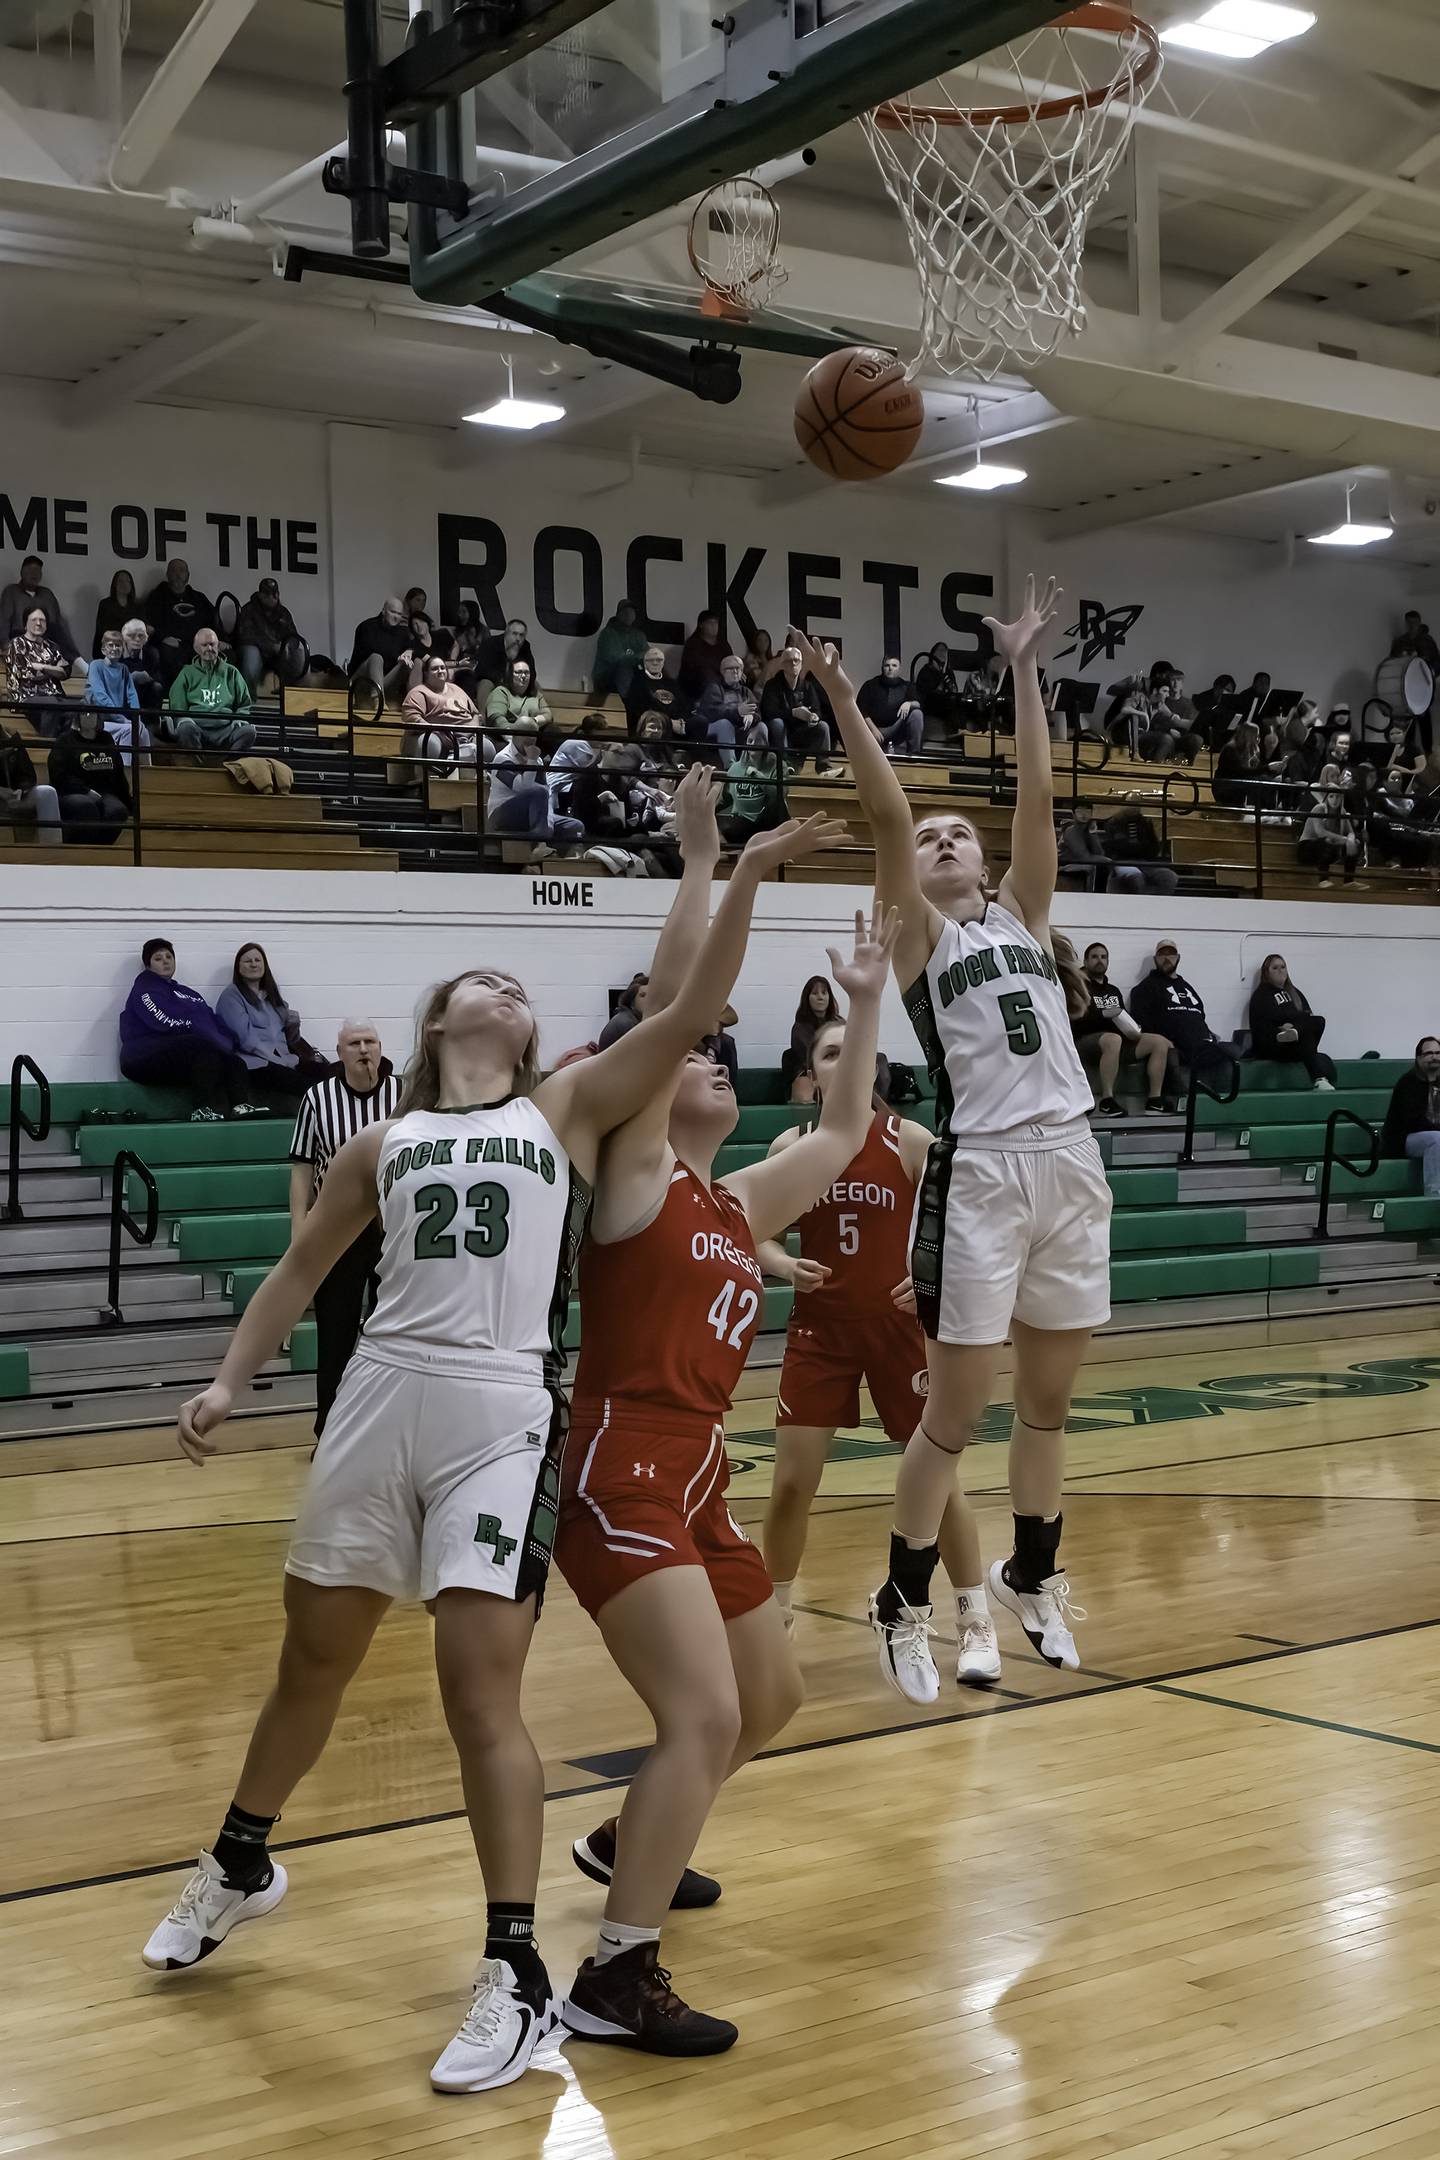 Rock Falls' Claire Bickett (23) and Rylee Johnson (5) go up for a rebound against Oregon's Teagan Champley (42) during their Big Northern Conference game Friday night at Tabor Gym.